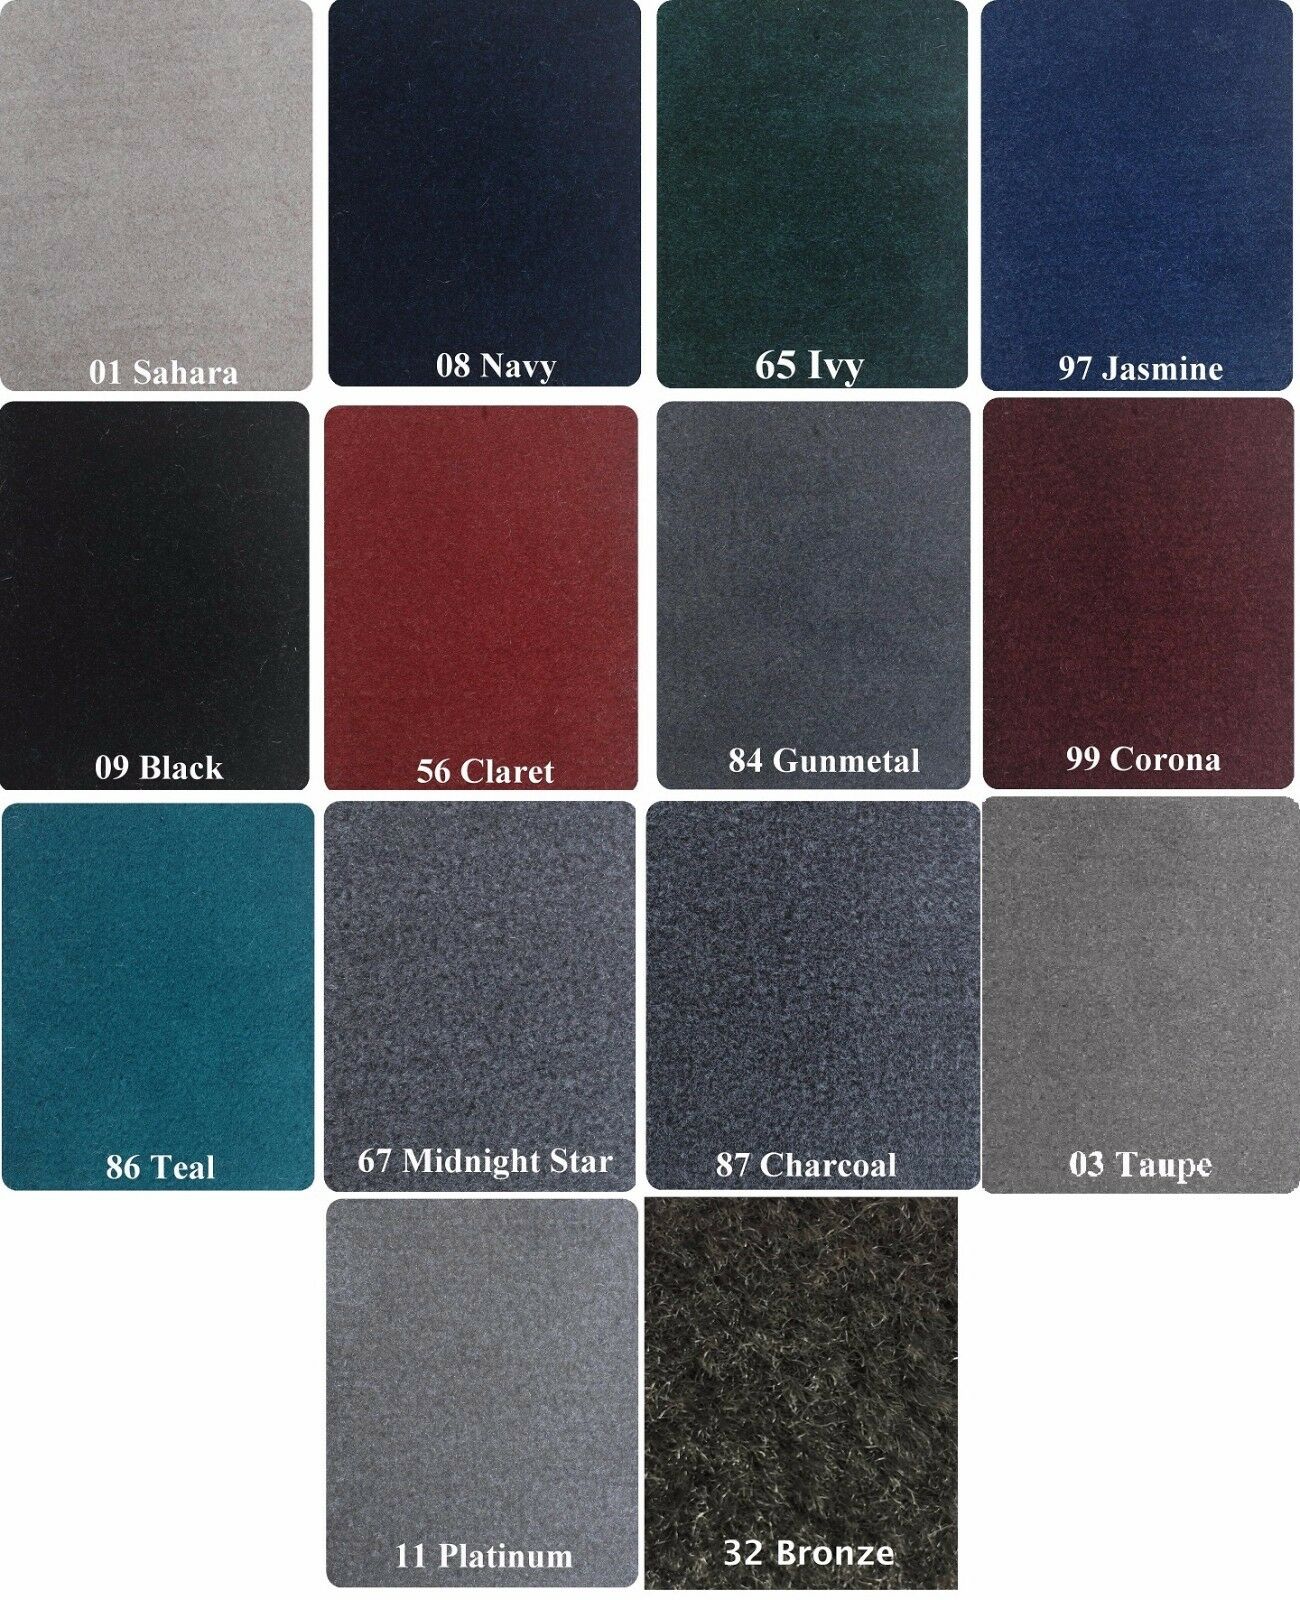 Boat / Marine Carpet 16 oz - 6' wide - You Choose Length (5'-30') and 14 Colors